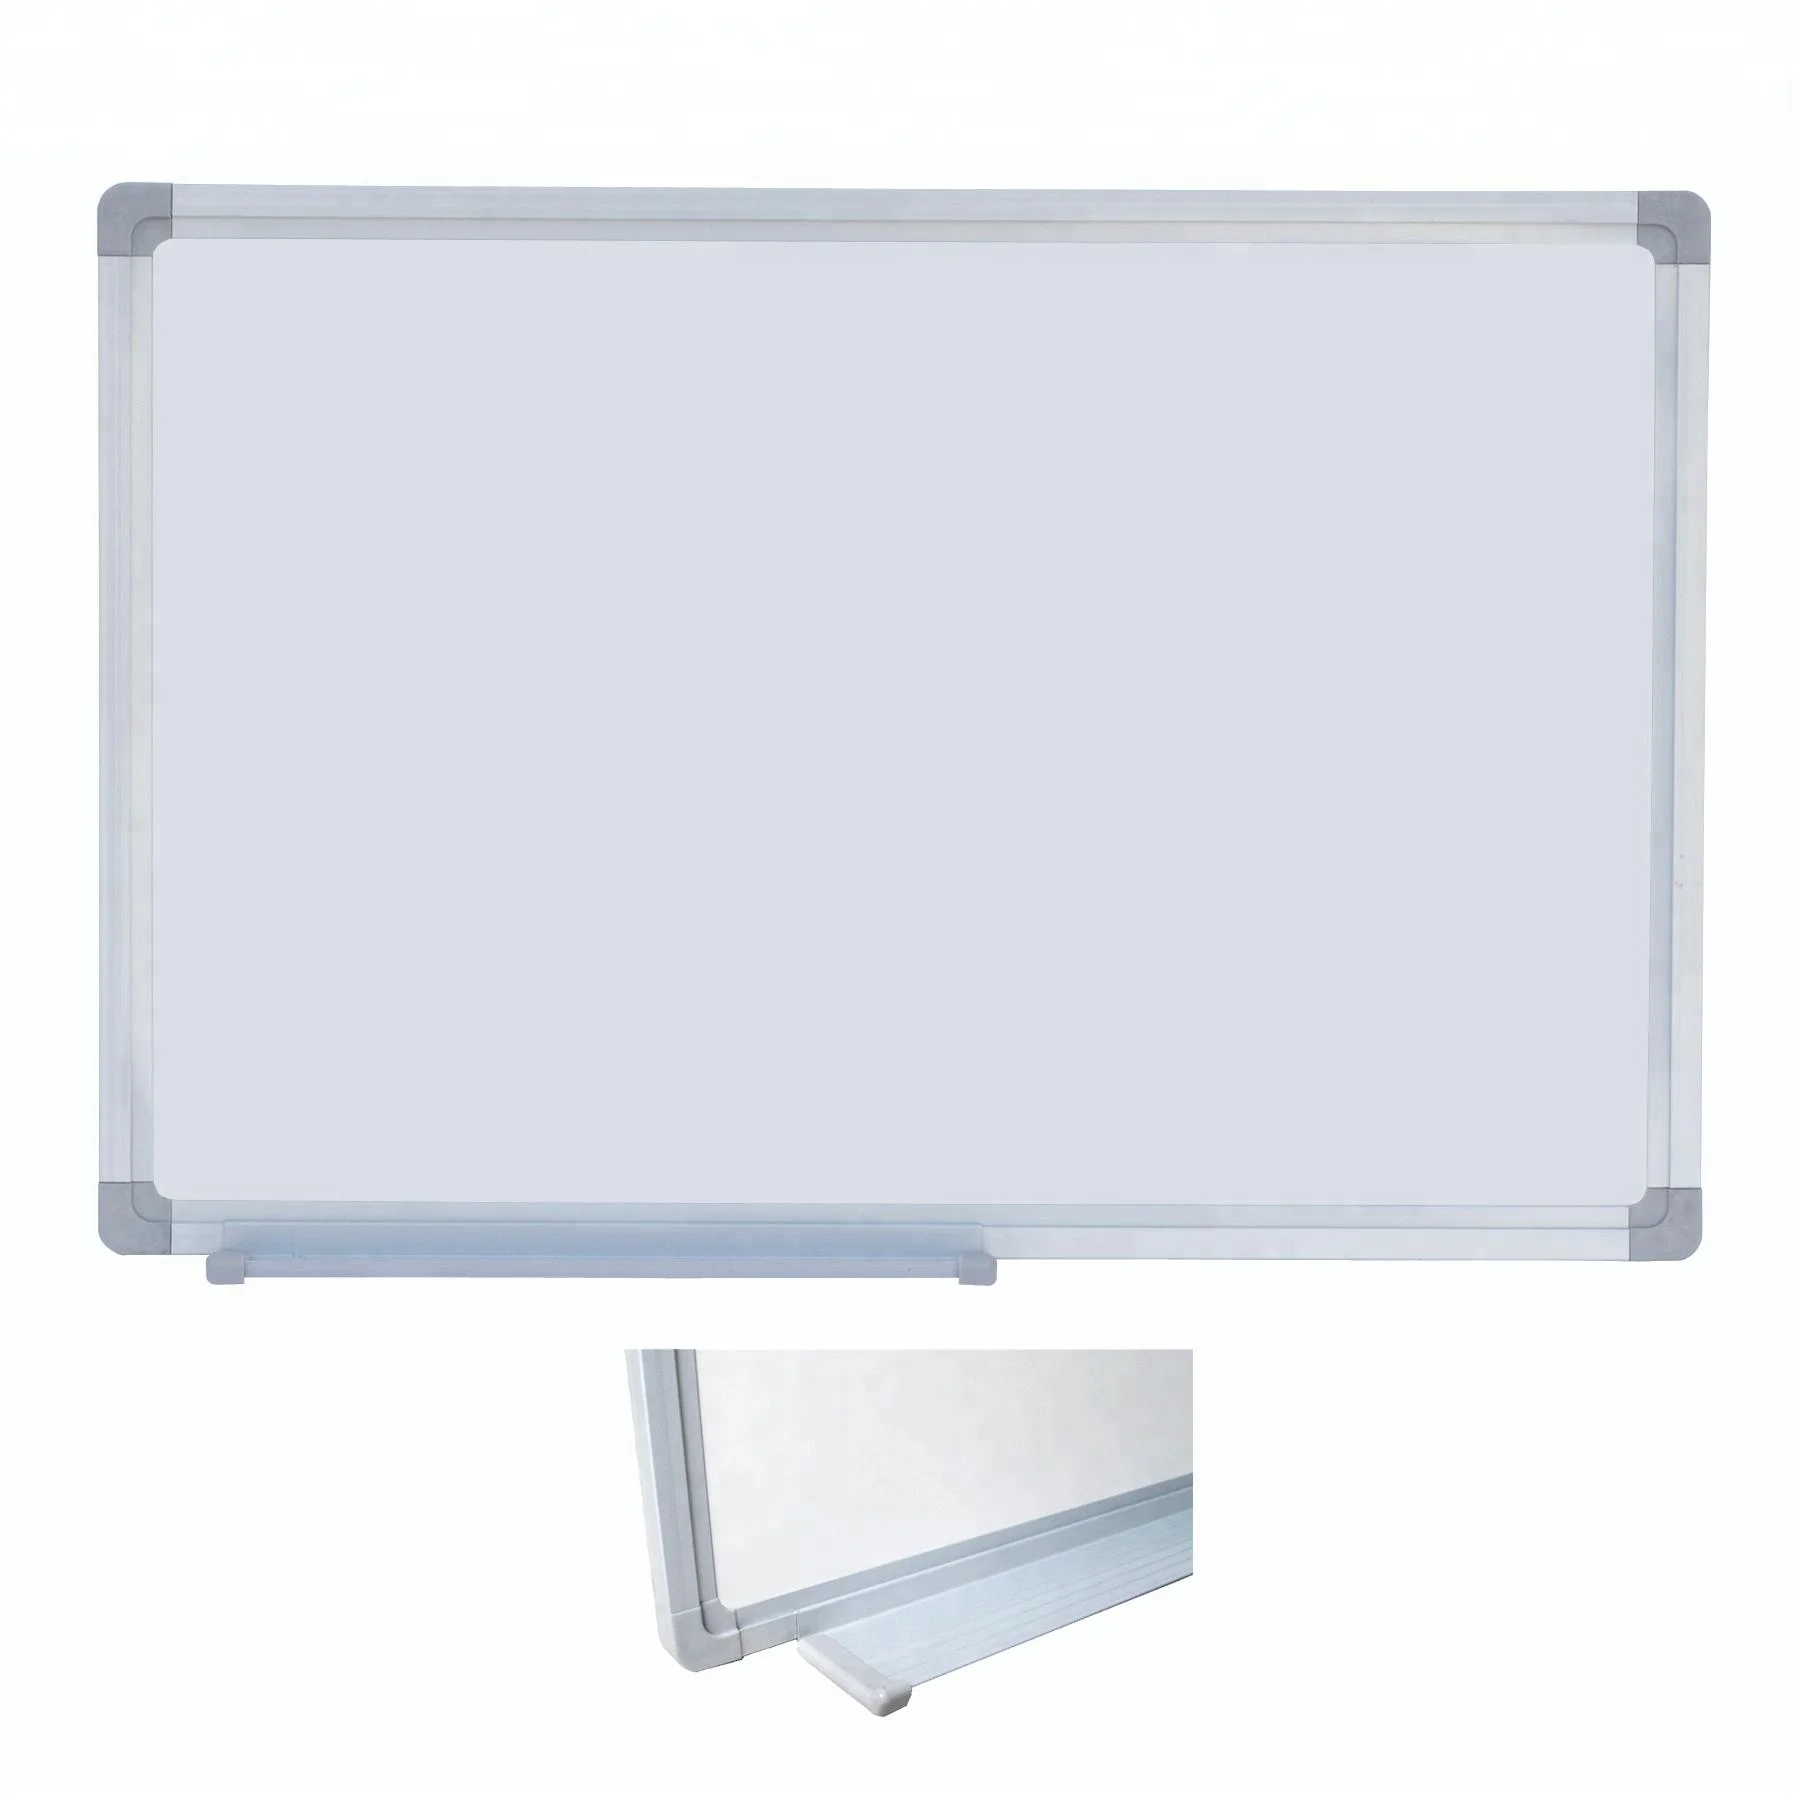 120X240cm Wall Mounted Magnetic Whiteboard for School - China